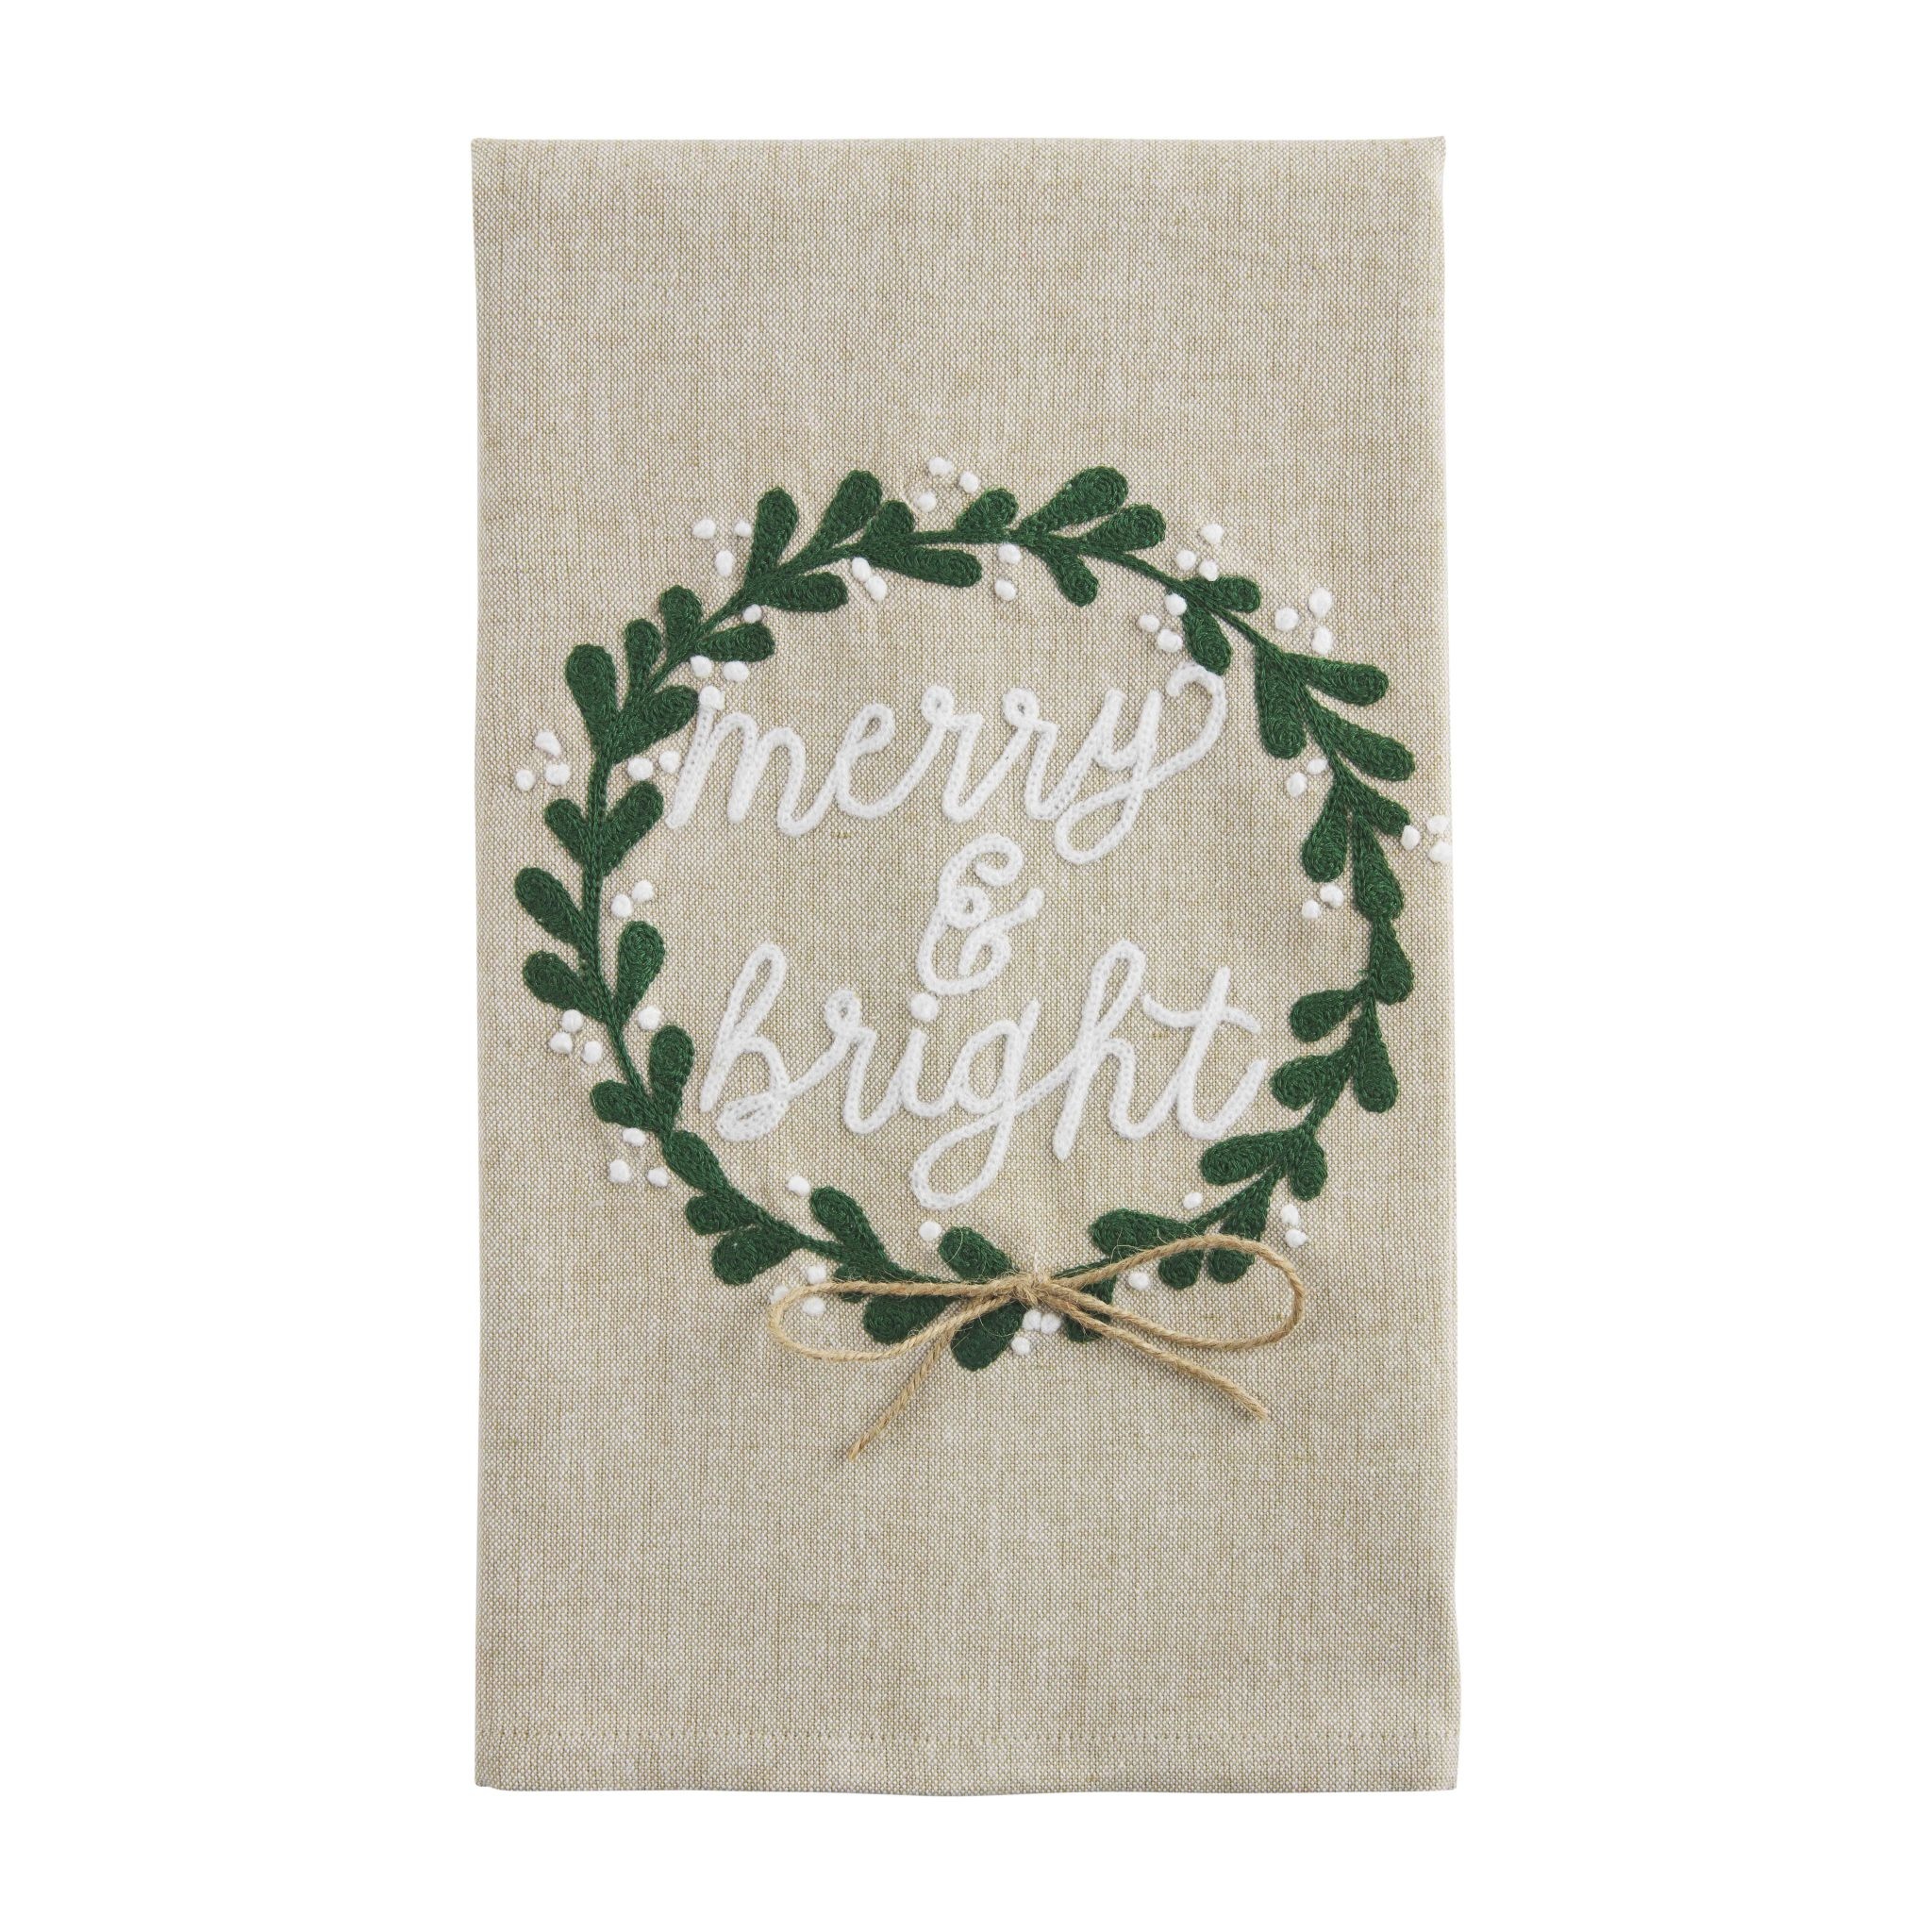 Mudpie MERRY BRIGHT EMBROIDERED TOWEL